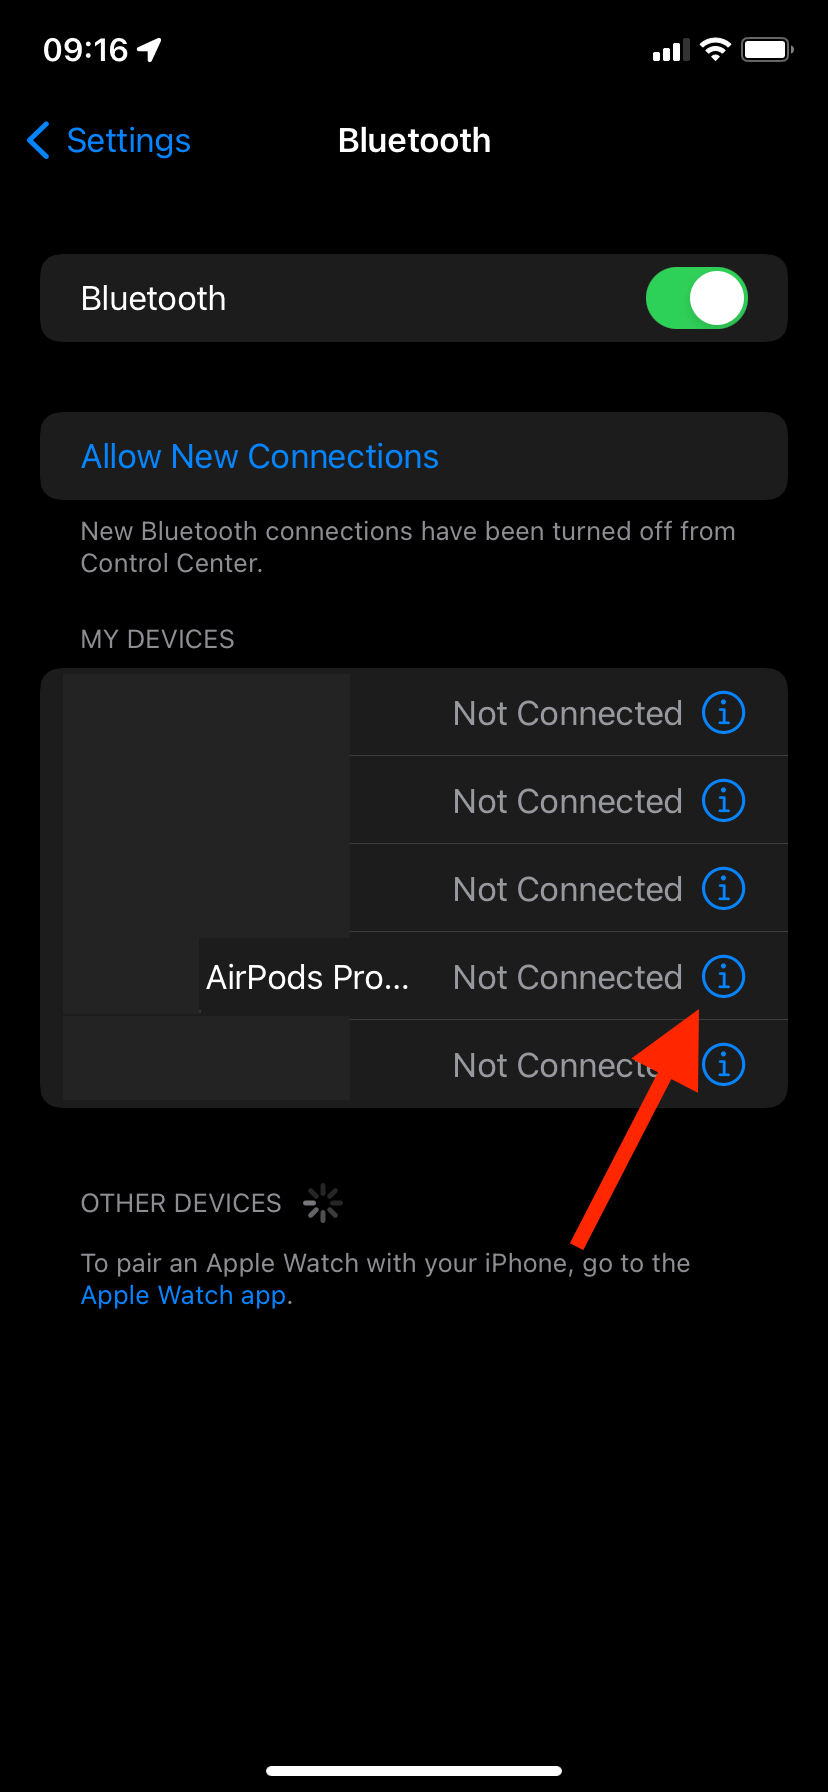 Tap on the 'i' letter next to the AirPods